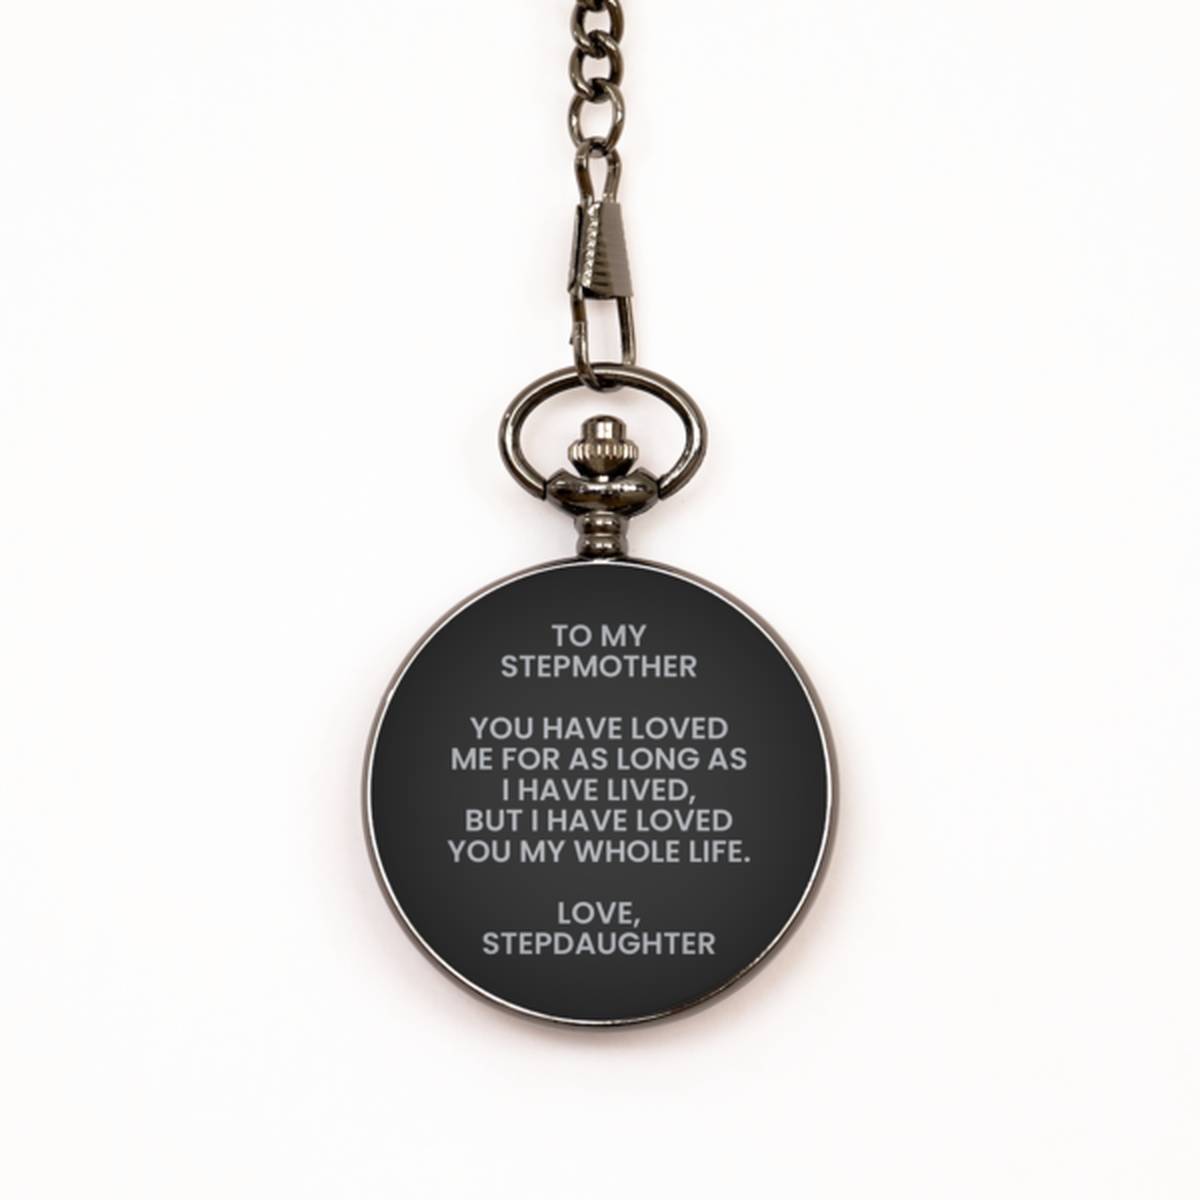 To My Stepmother   Black Pocket Watch, Loved You My Whole Life, Valentines Gifts For Stepmother From Stepdaughter, Birthday Gifts For Women